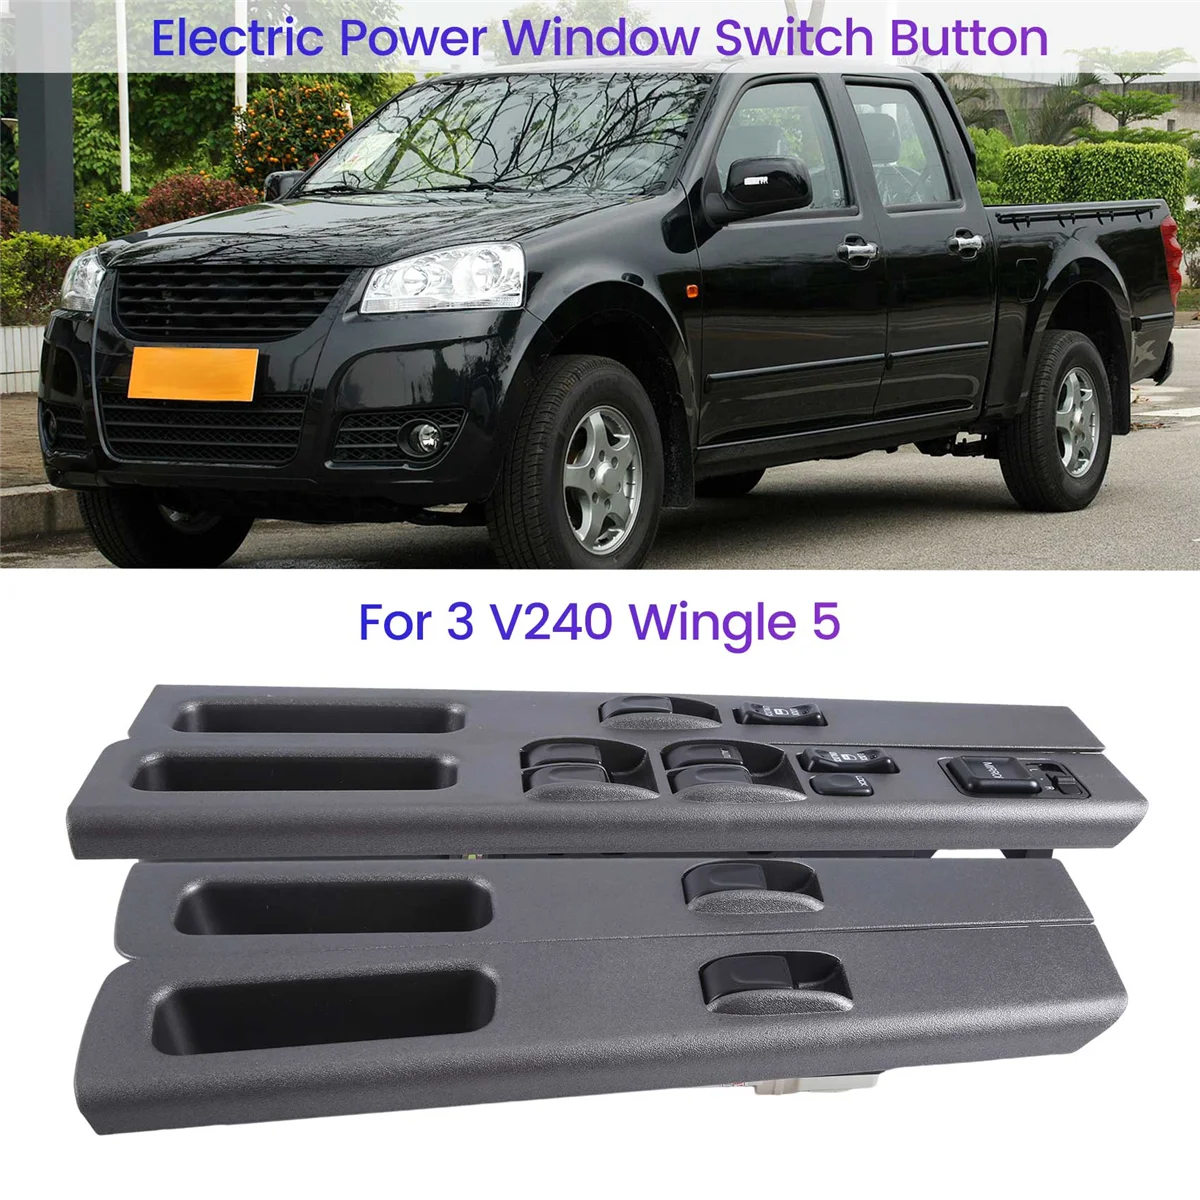 

Car Electric Power Window Switch Lifter Regulator Control Button for Great Wall Wingle 3/V240 Wingle 5 2006-2011 With